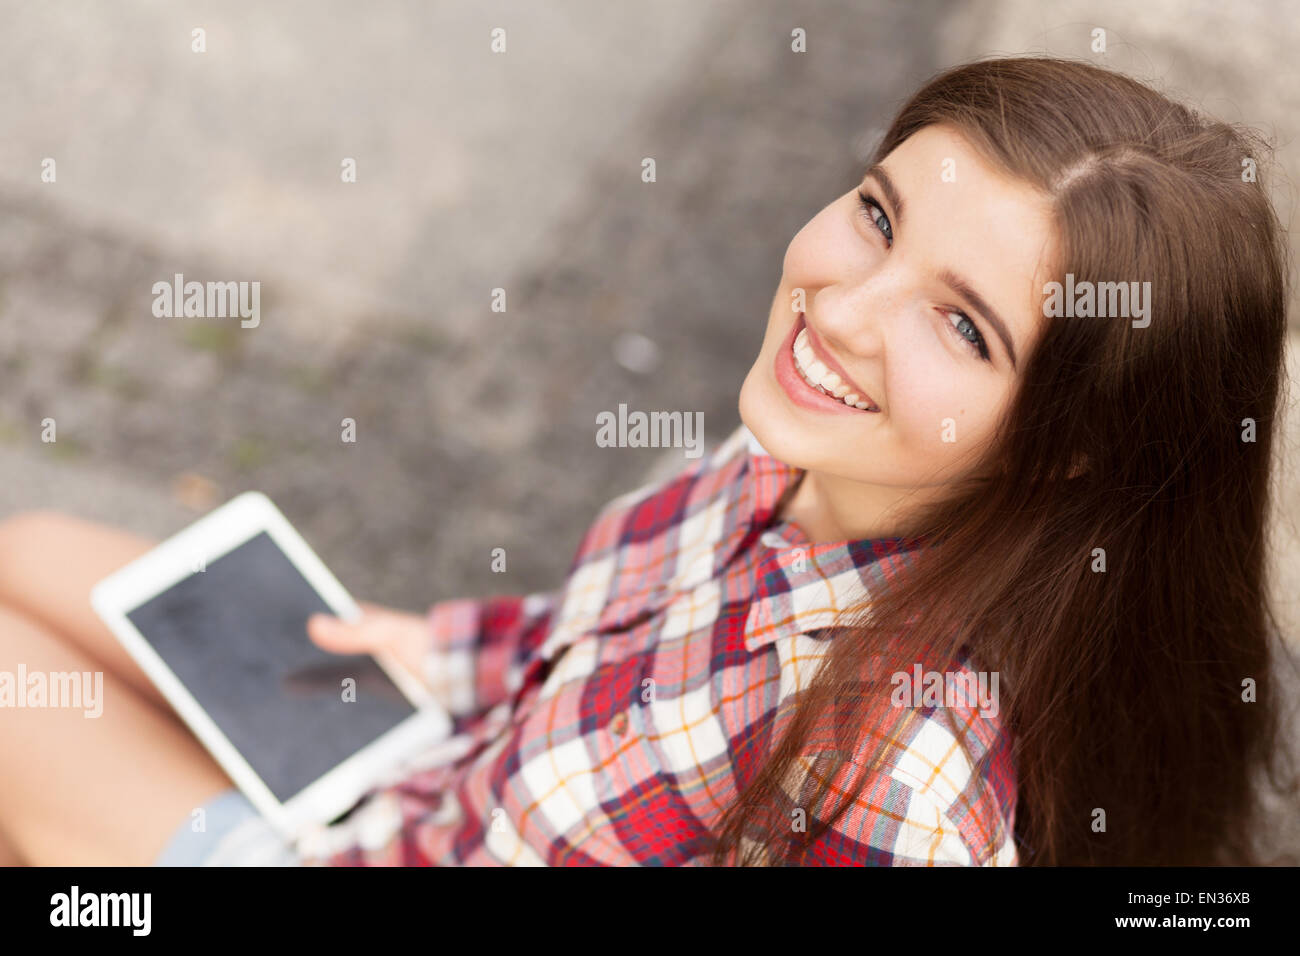 Face portrait of young woman using a tablet pc Stock Photo